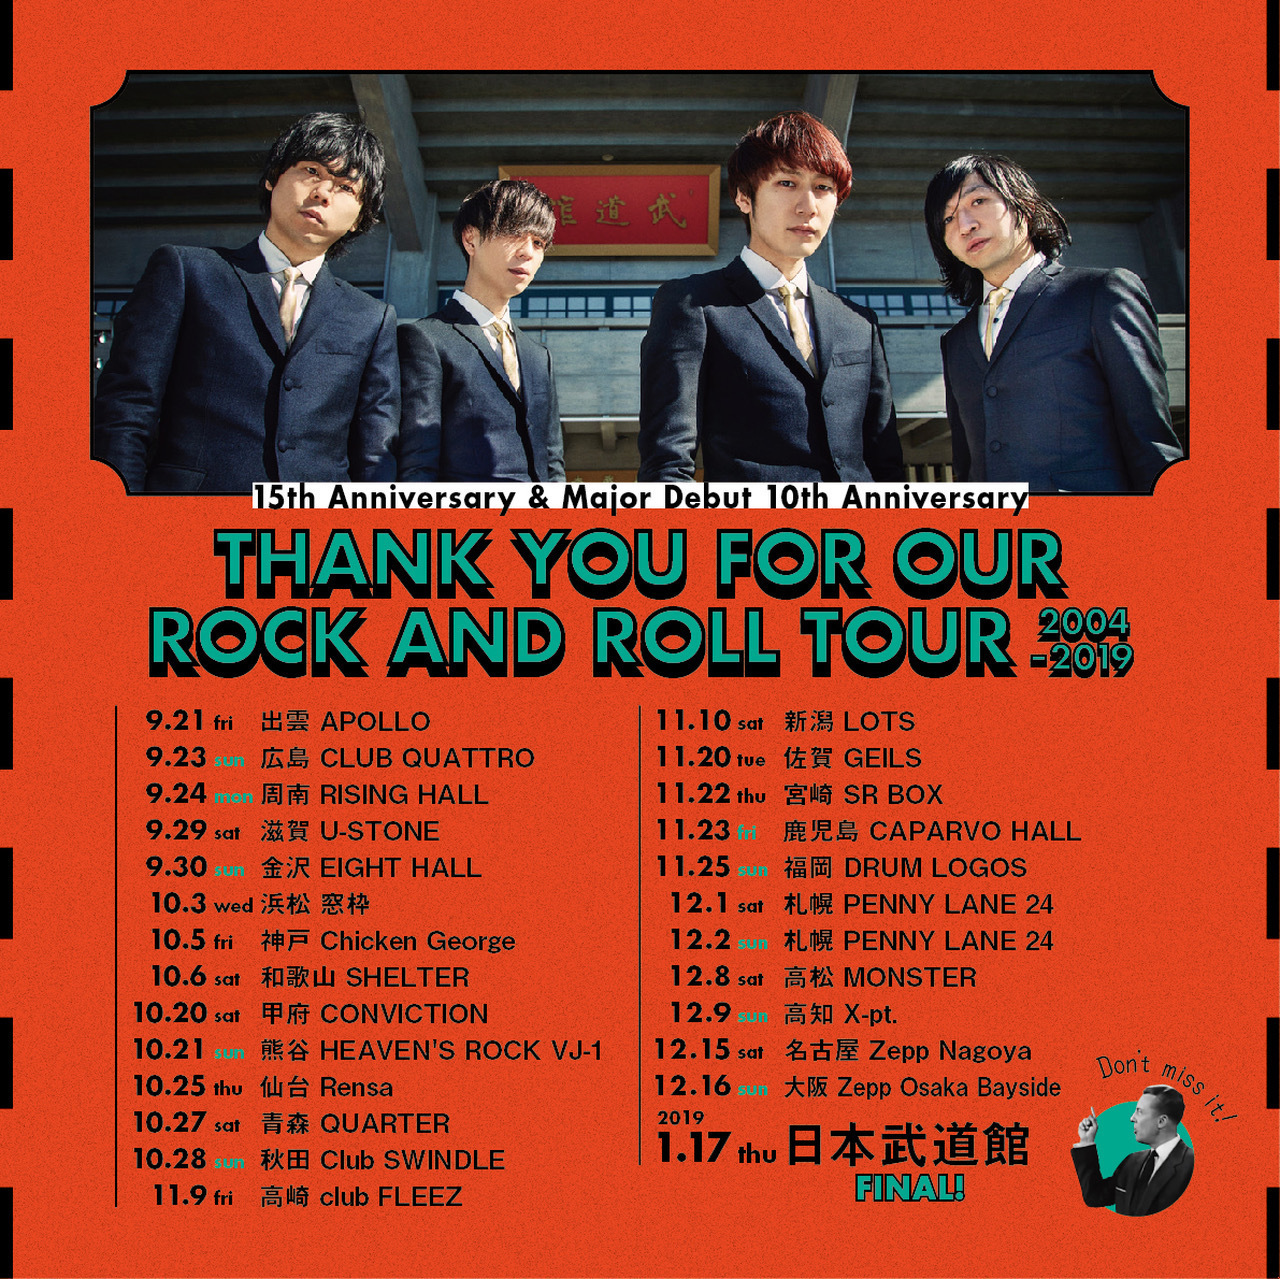 「Thank you for our Rock and Roll Tour 2004-2019」12月公演分のチケット一般発売が開始！